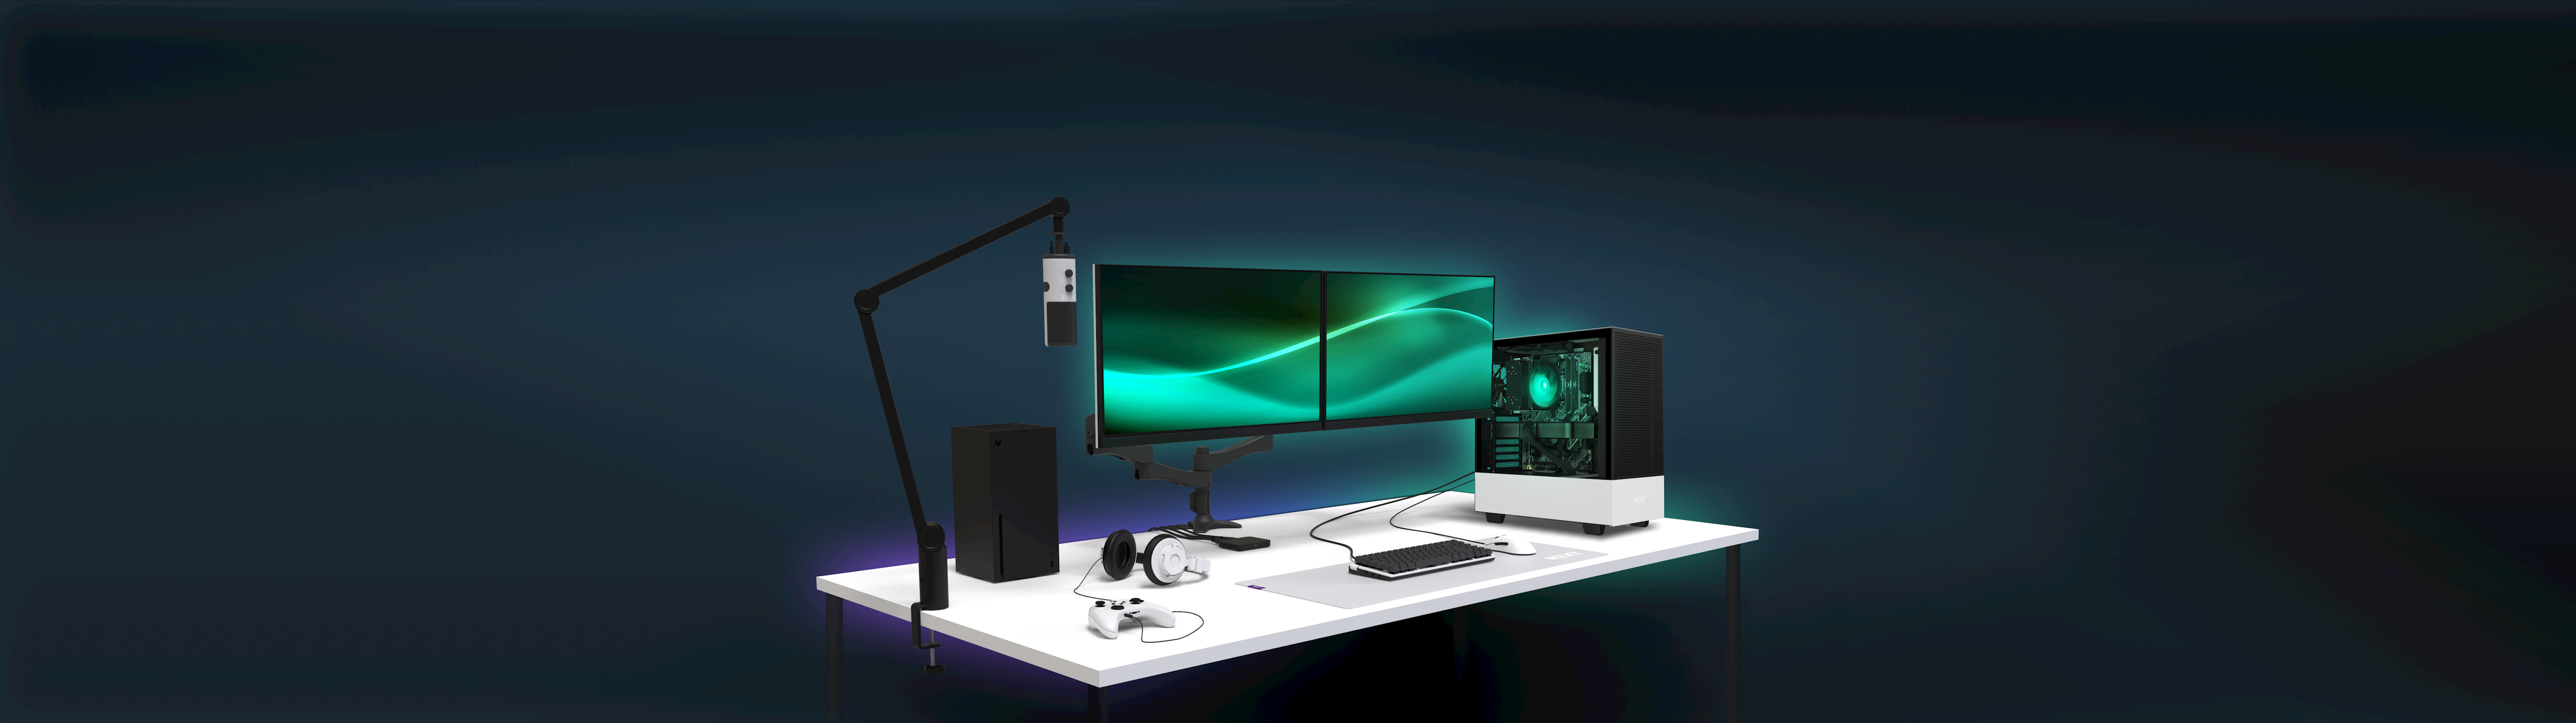 Custom NZXT Gaming PC Desk featuring Exclusive H510 PC, Dual Canvas 27Q QHD 165Hz Monitors, Capsule Microphone, Boom arm, Signal Capture Card, Function Keyboard and Lift Mouse